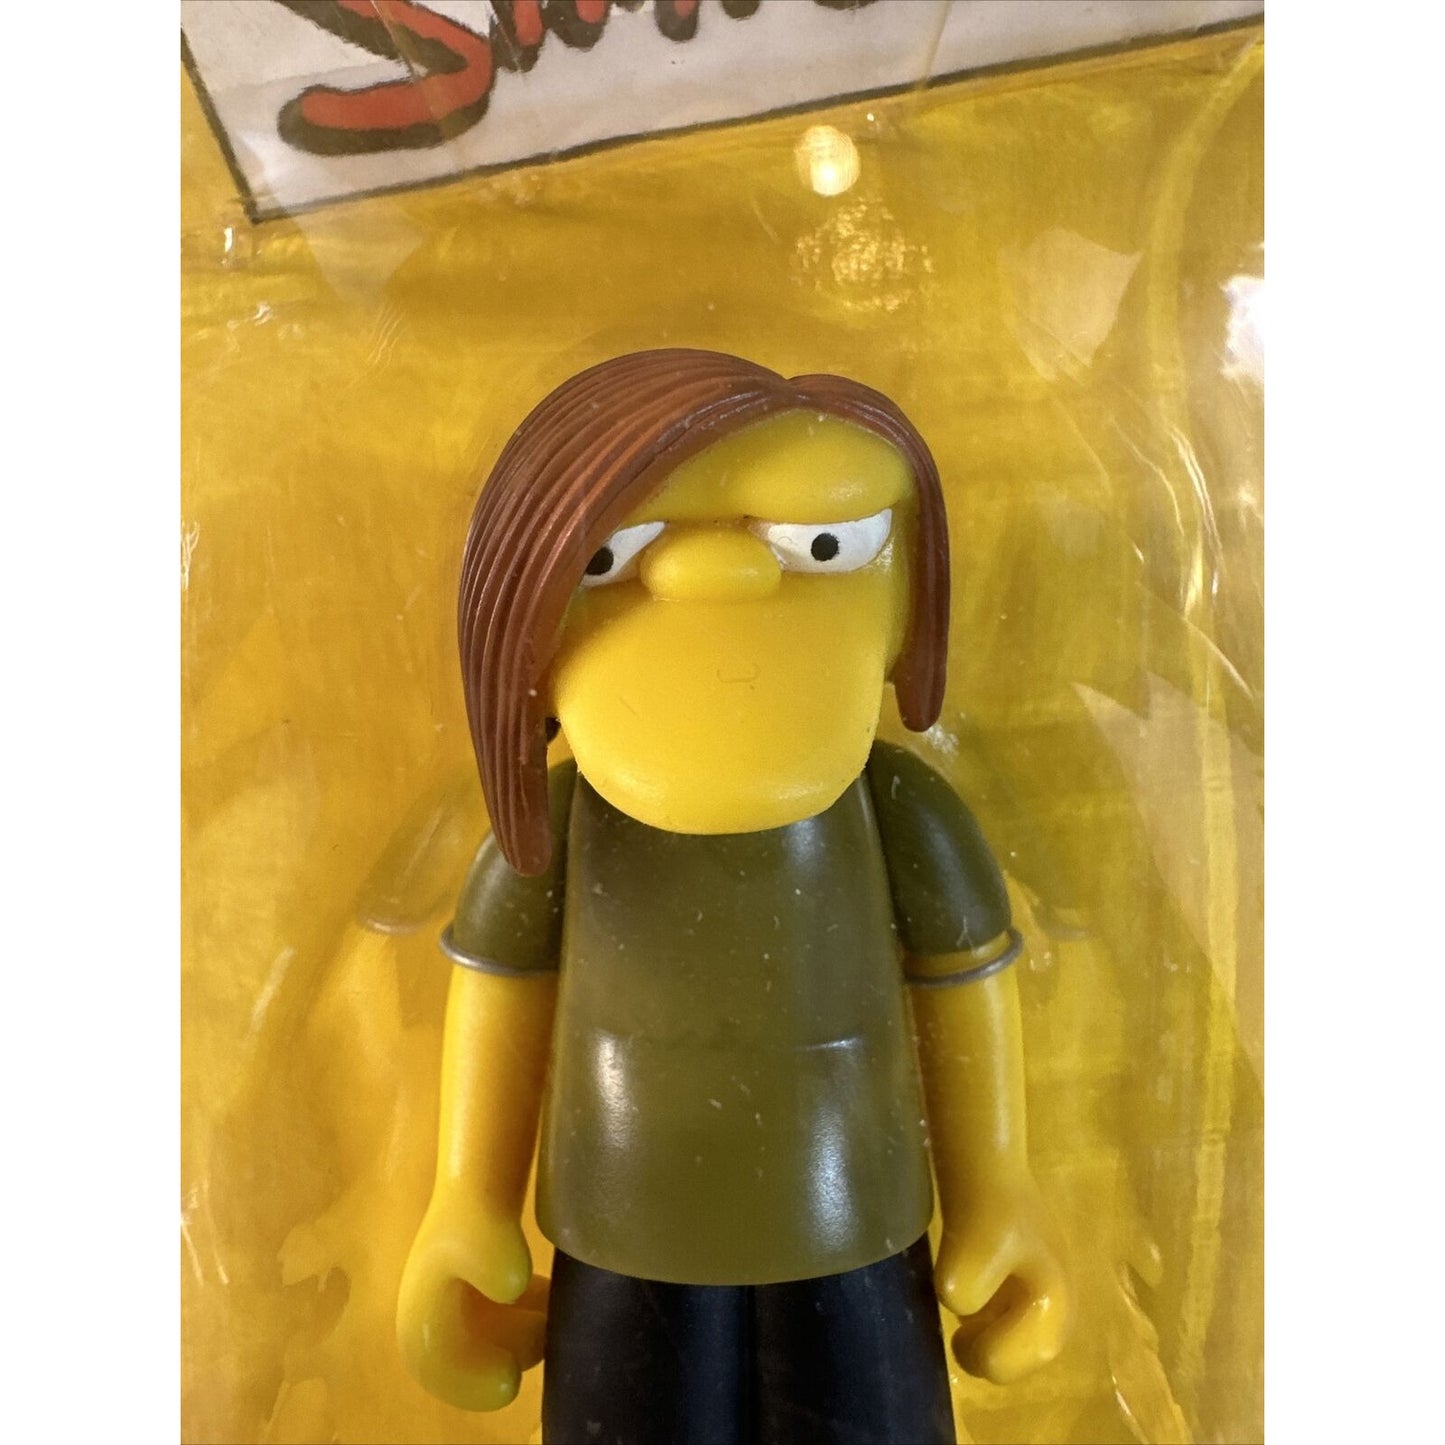 The Simpsons Dolph Series 7 World of Springfield Action Figure Playmates